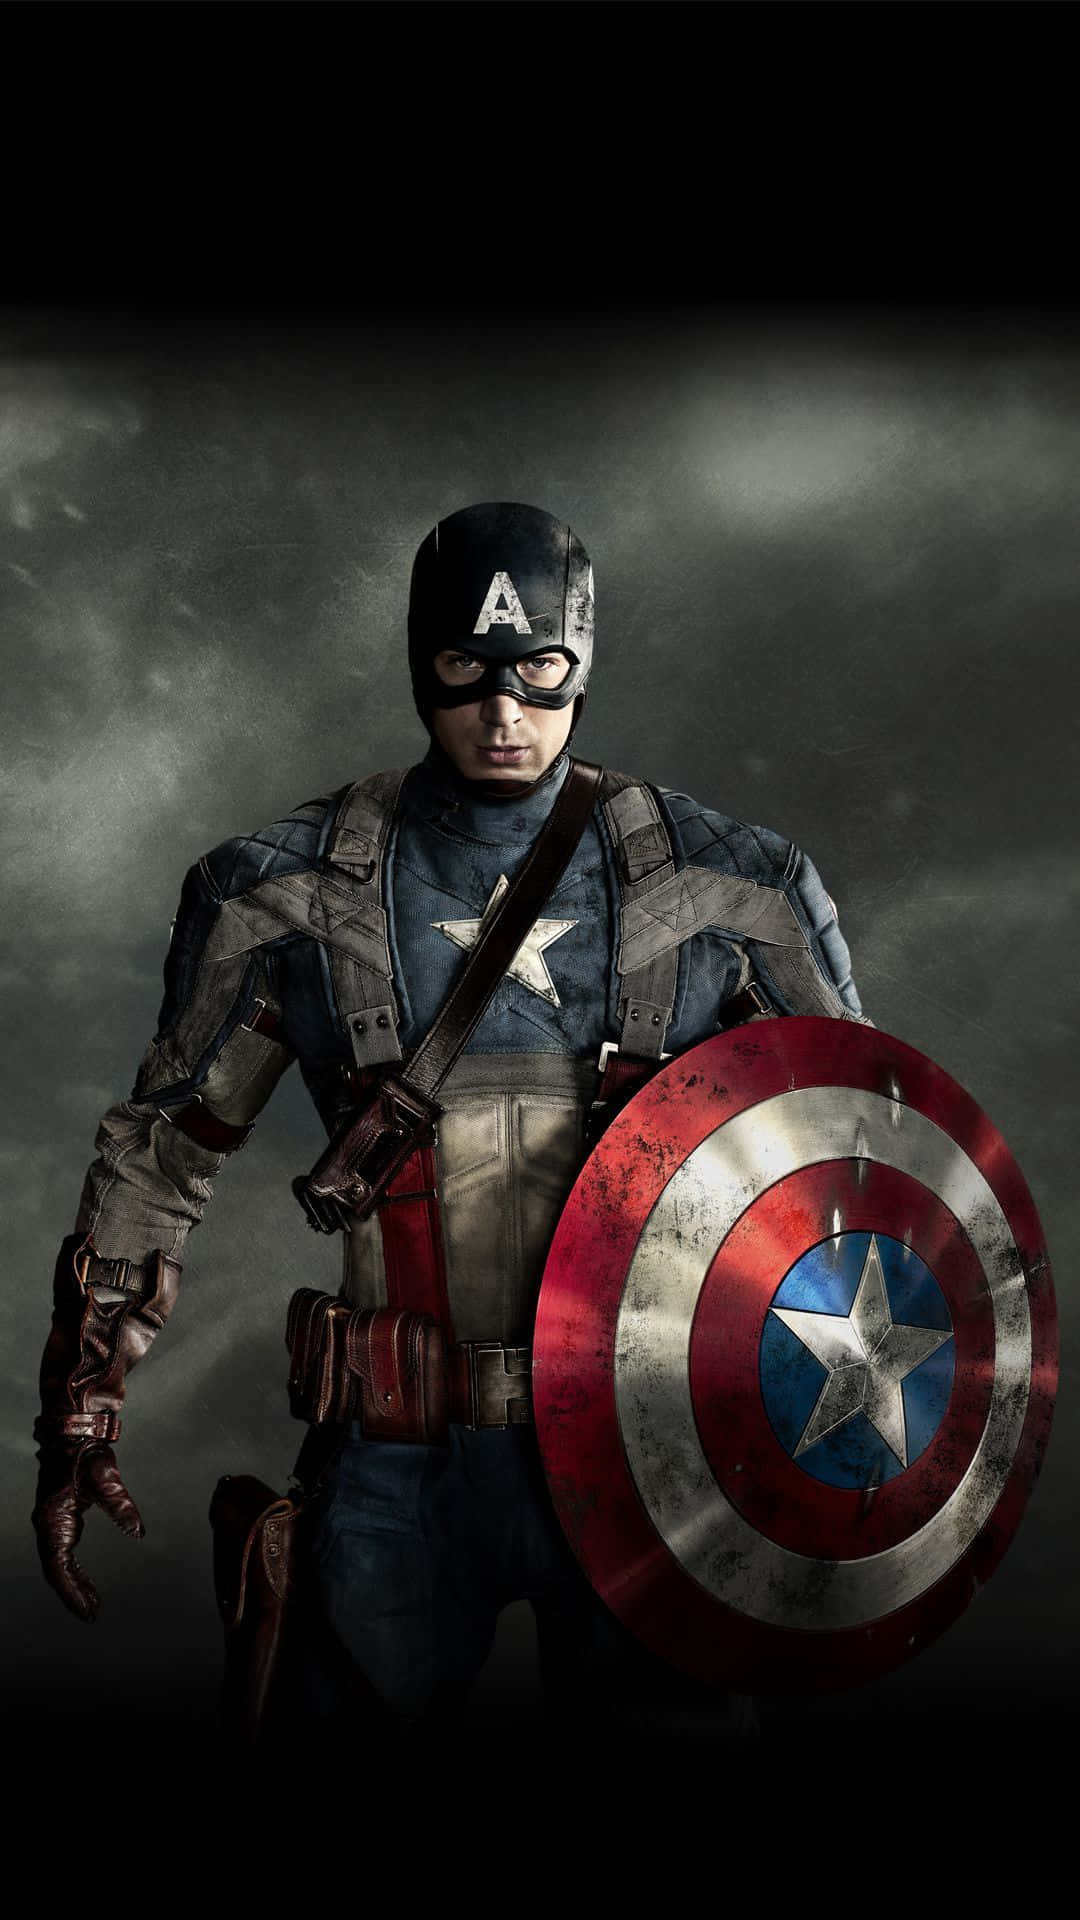 Captain America ready to stand up and fight for Android users